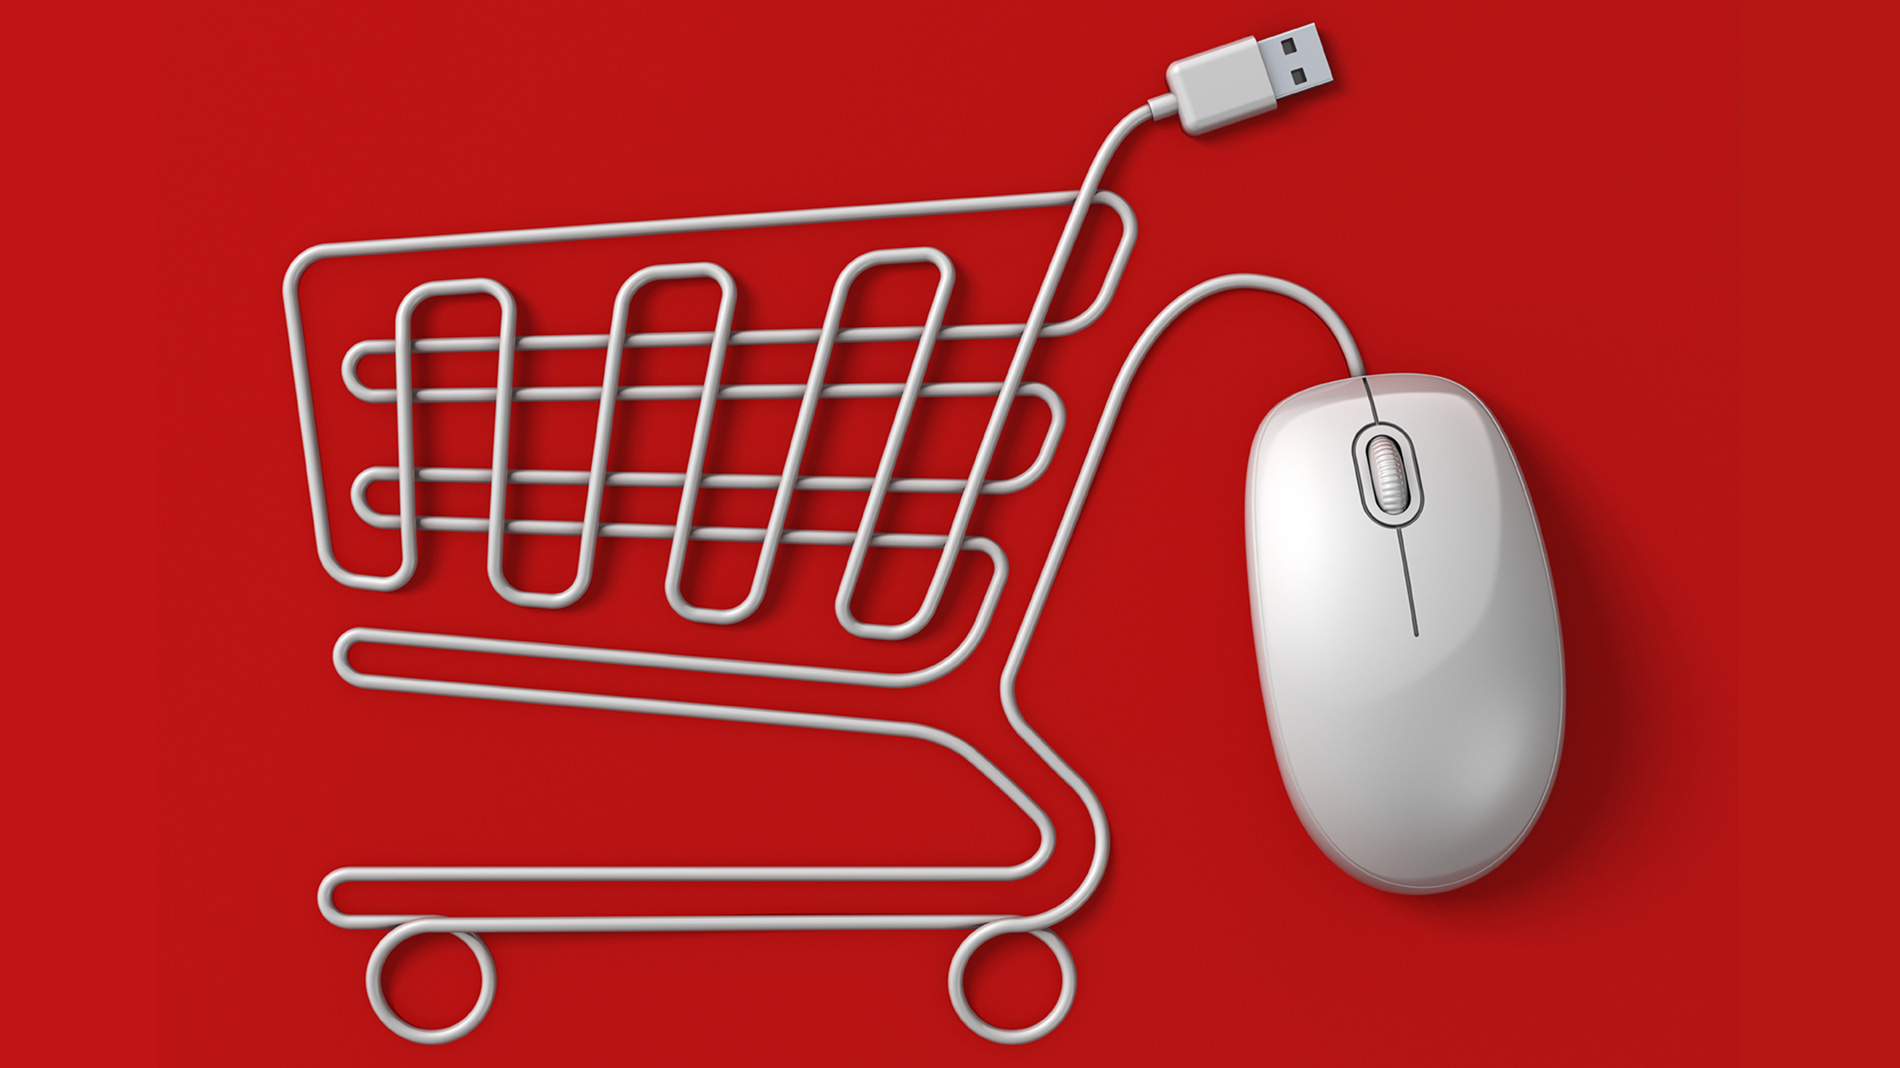 wallpaper online shop,mouse,product,input device,technology,electronic device